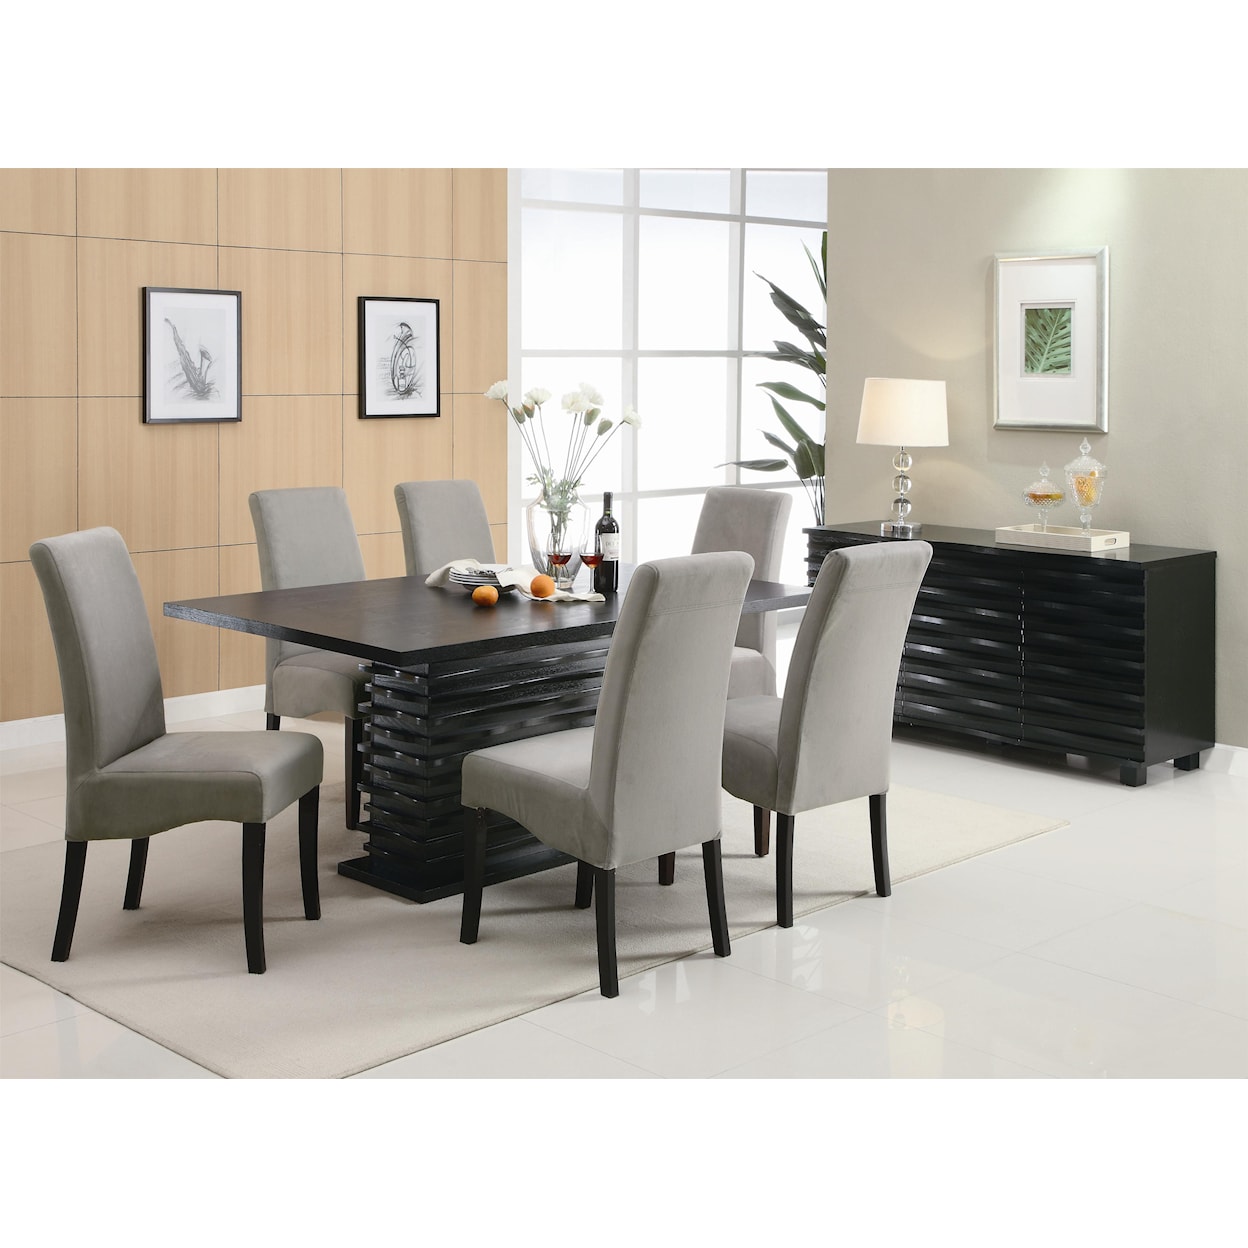 Coaster Stanton  7pc Dining Room Group